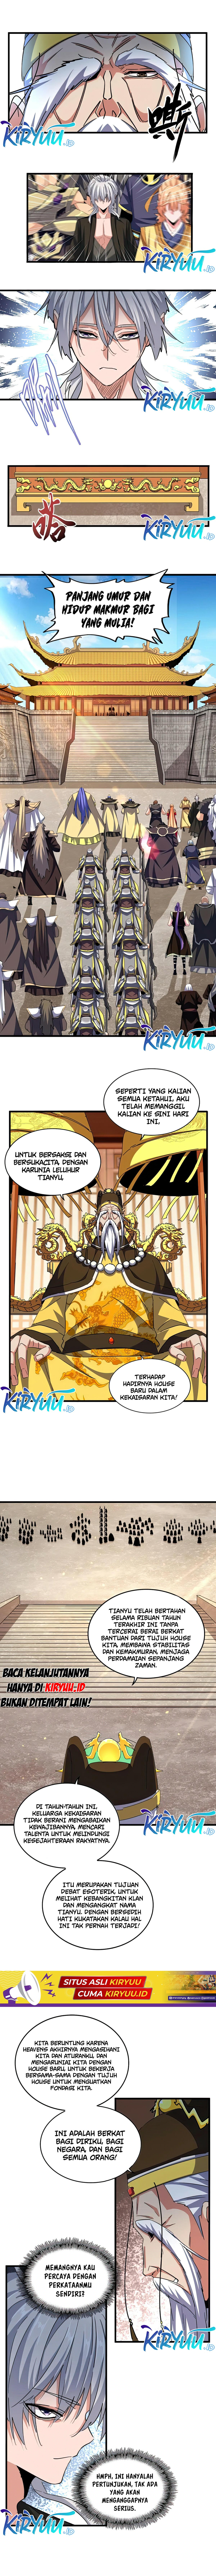 Magic Emperor Chapter 386 Image 5